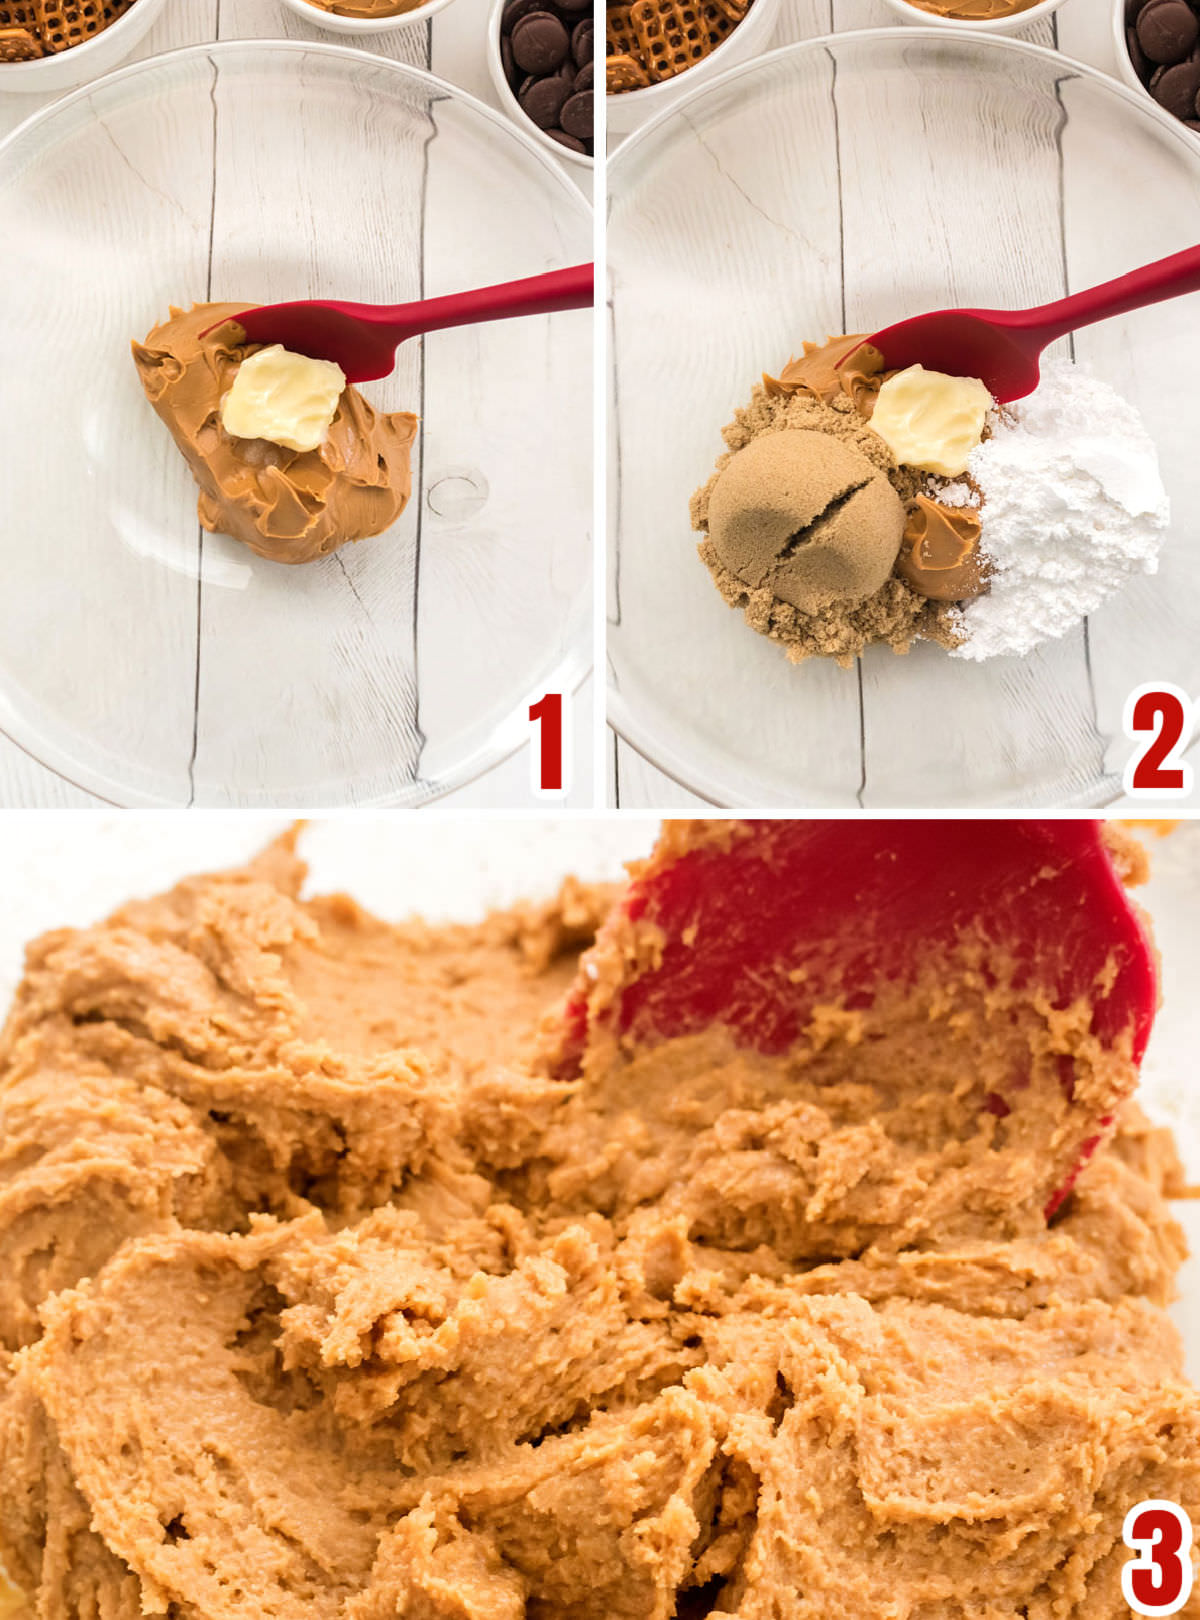 Collage image showing the steps for making the Peanut Butter filling for the pretzel bites.